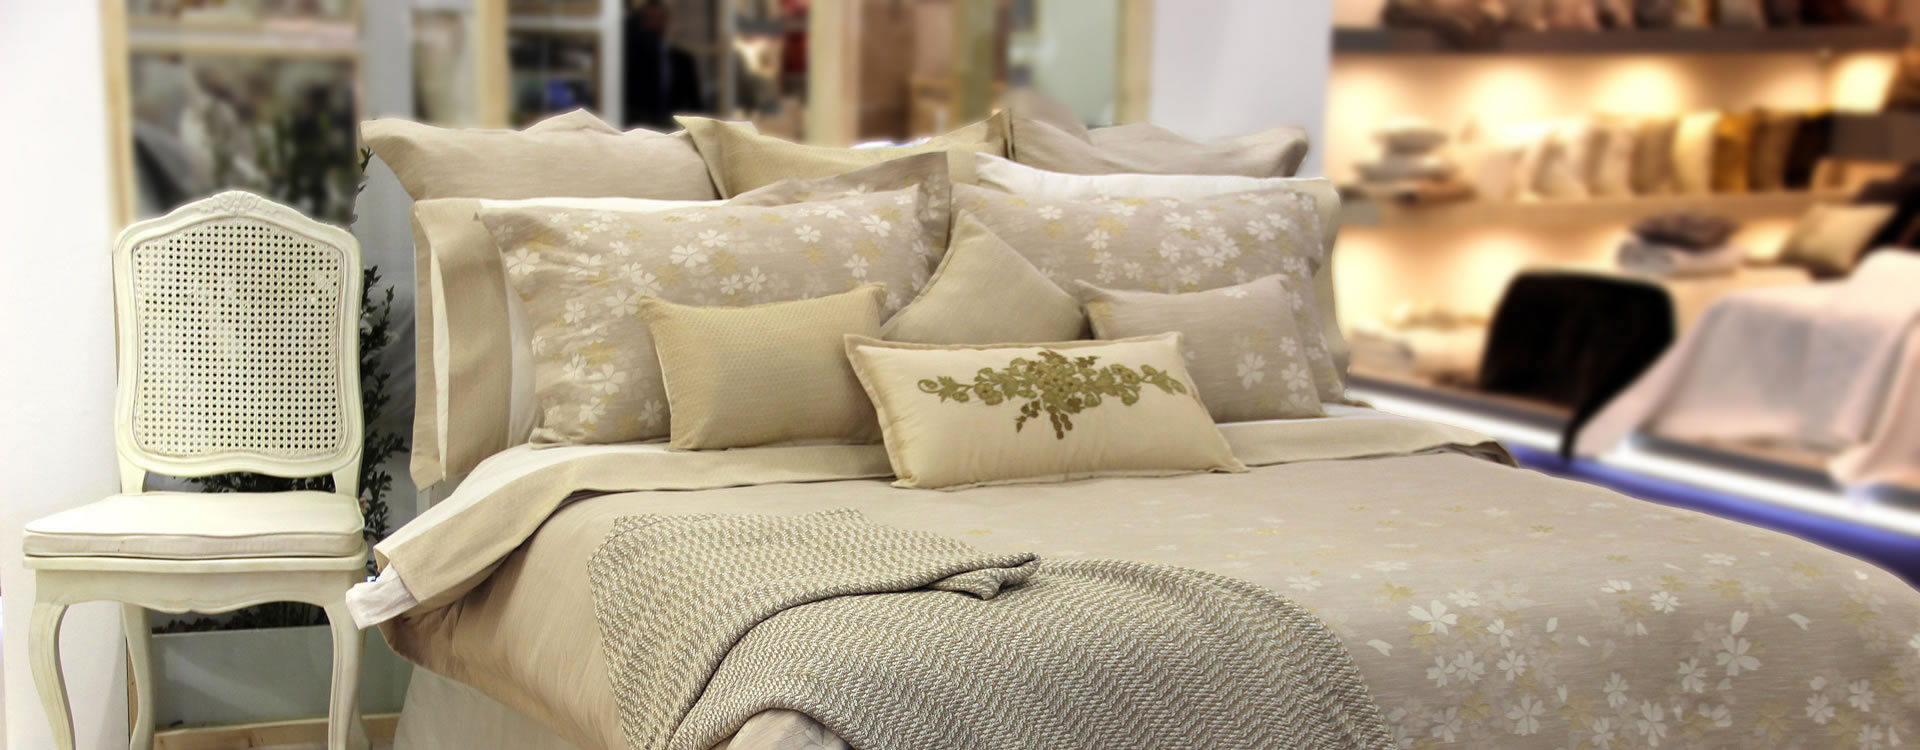 Experience a cotton treat of high-end bedding fashions